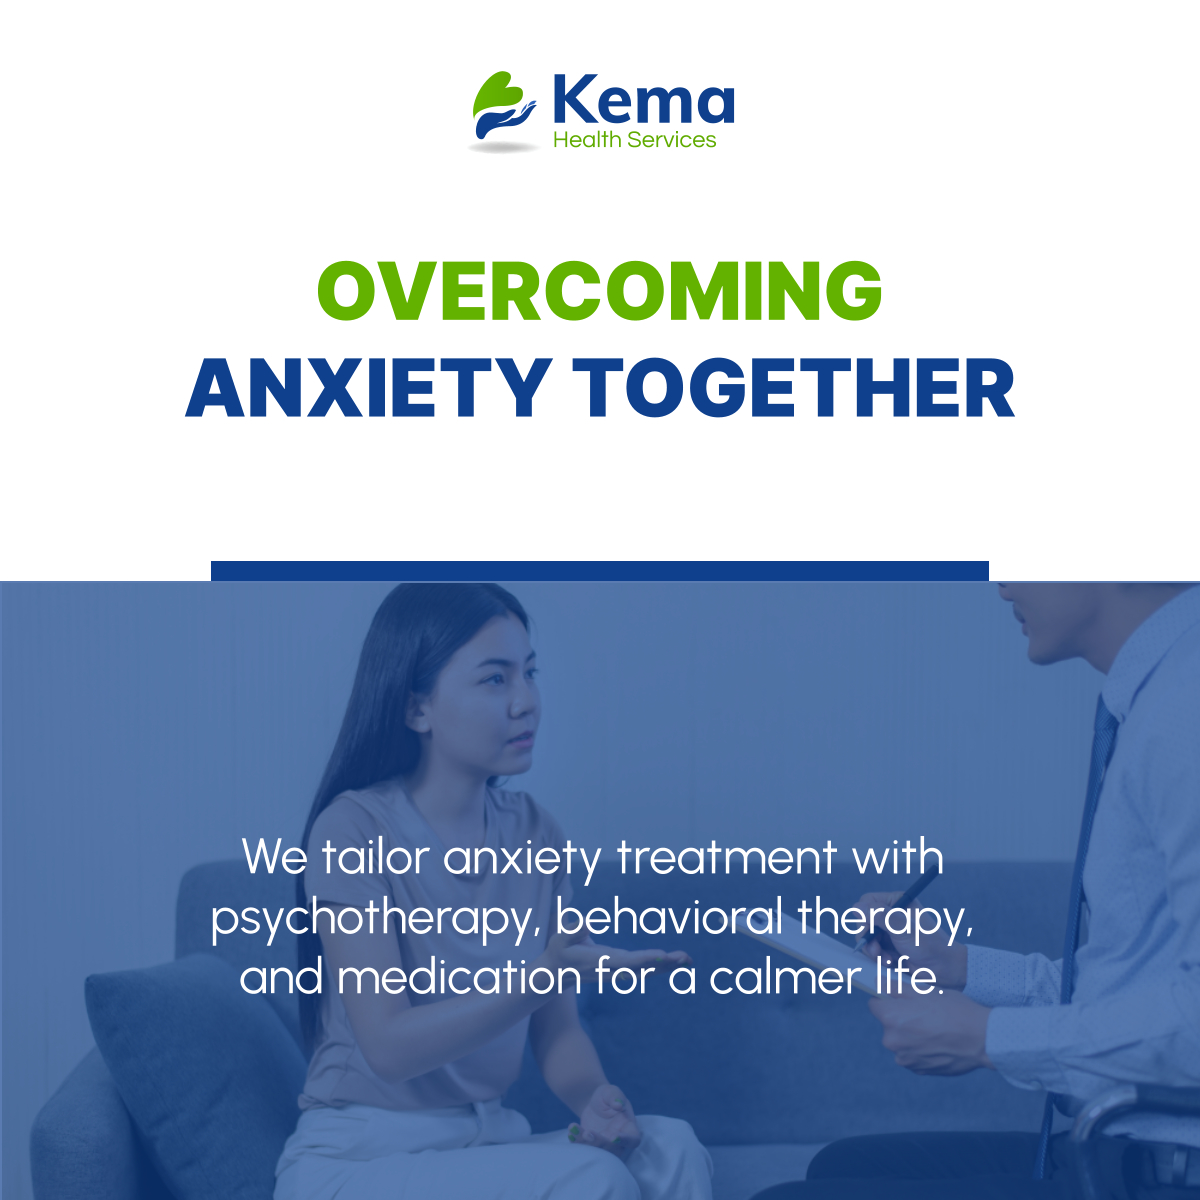 Anxiety doesn't have to dictate your life. With our expert care, discover how psychotherapy, behavioral techniques, and medication can bring peace and improve your overall well-being. Let's start this journey together. 

#FrederickMD #MentalHealthCare #AnxietyRelief